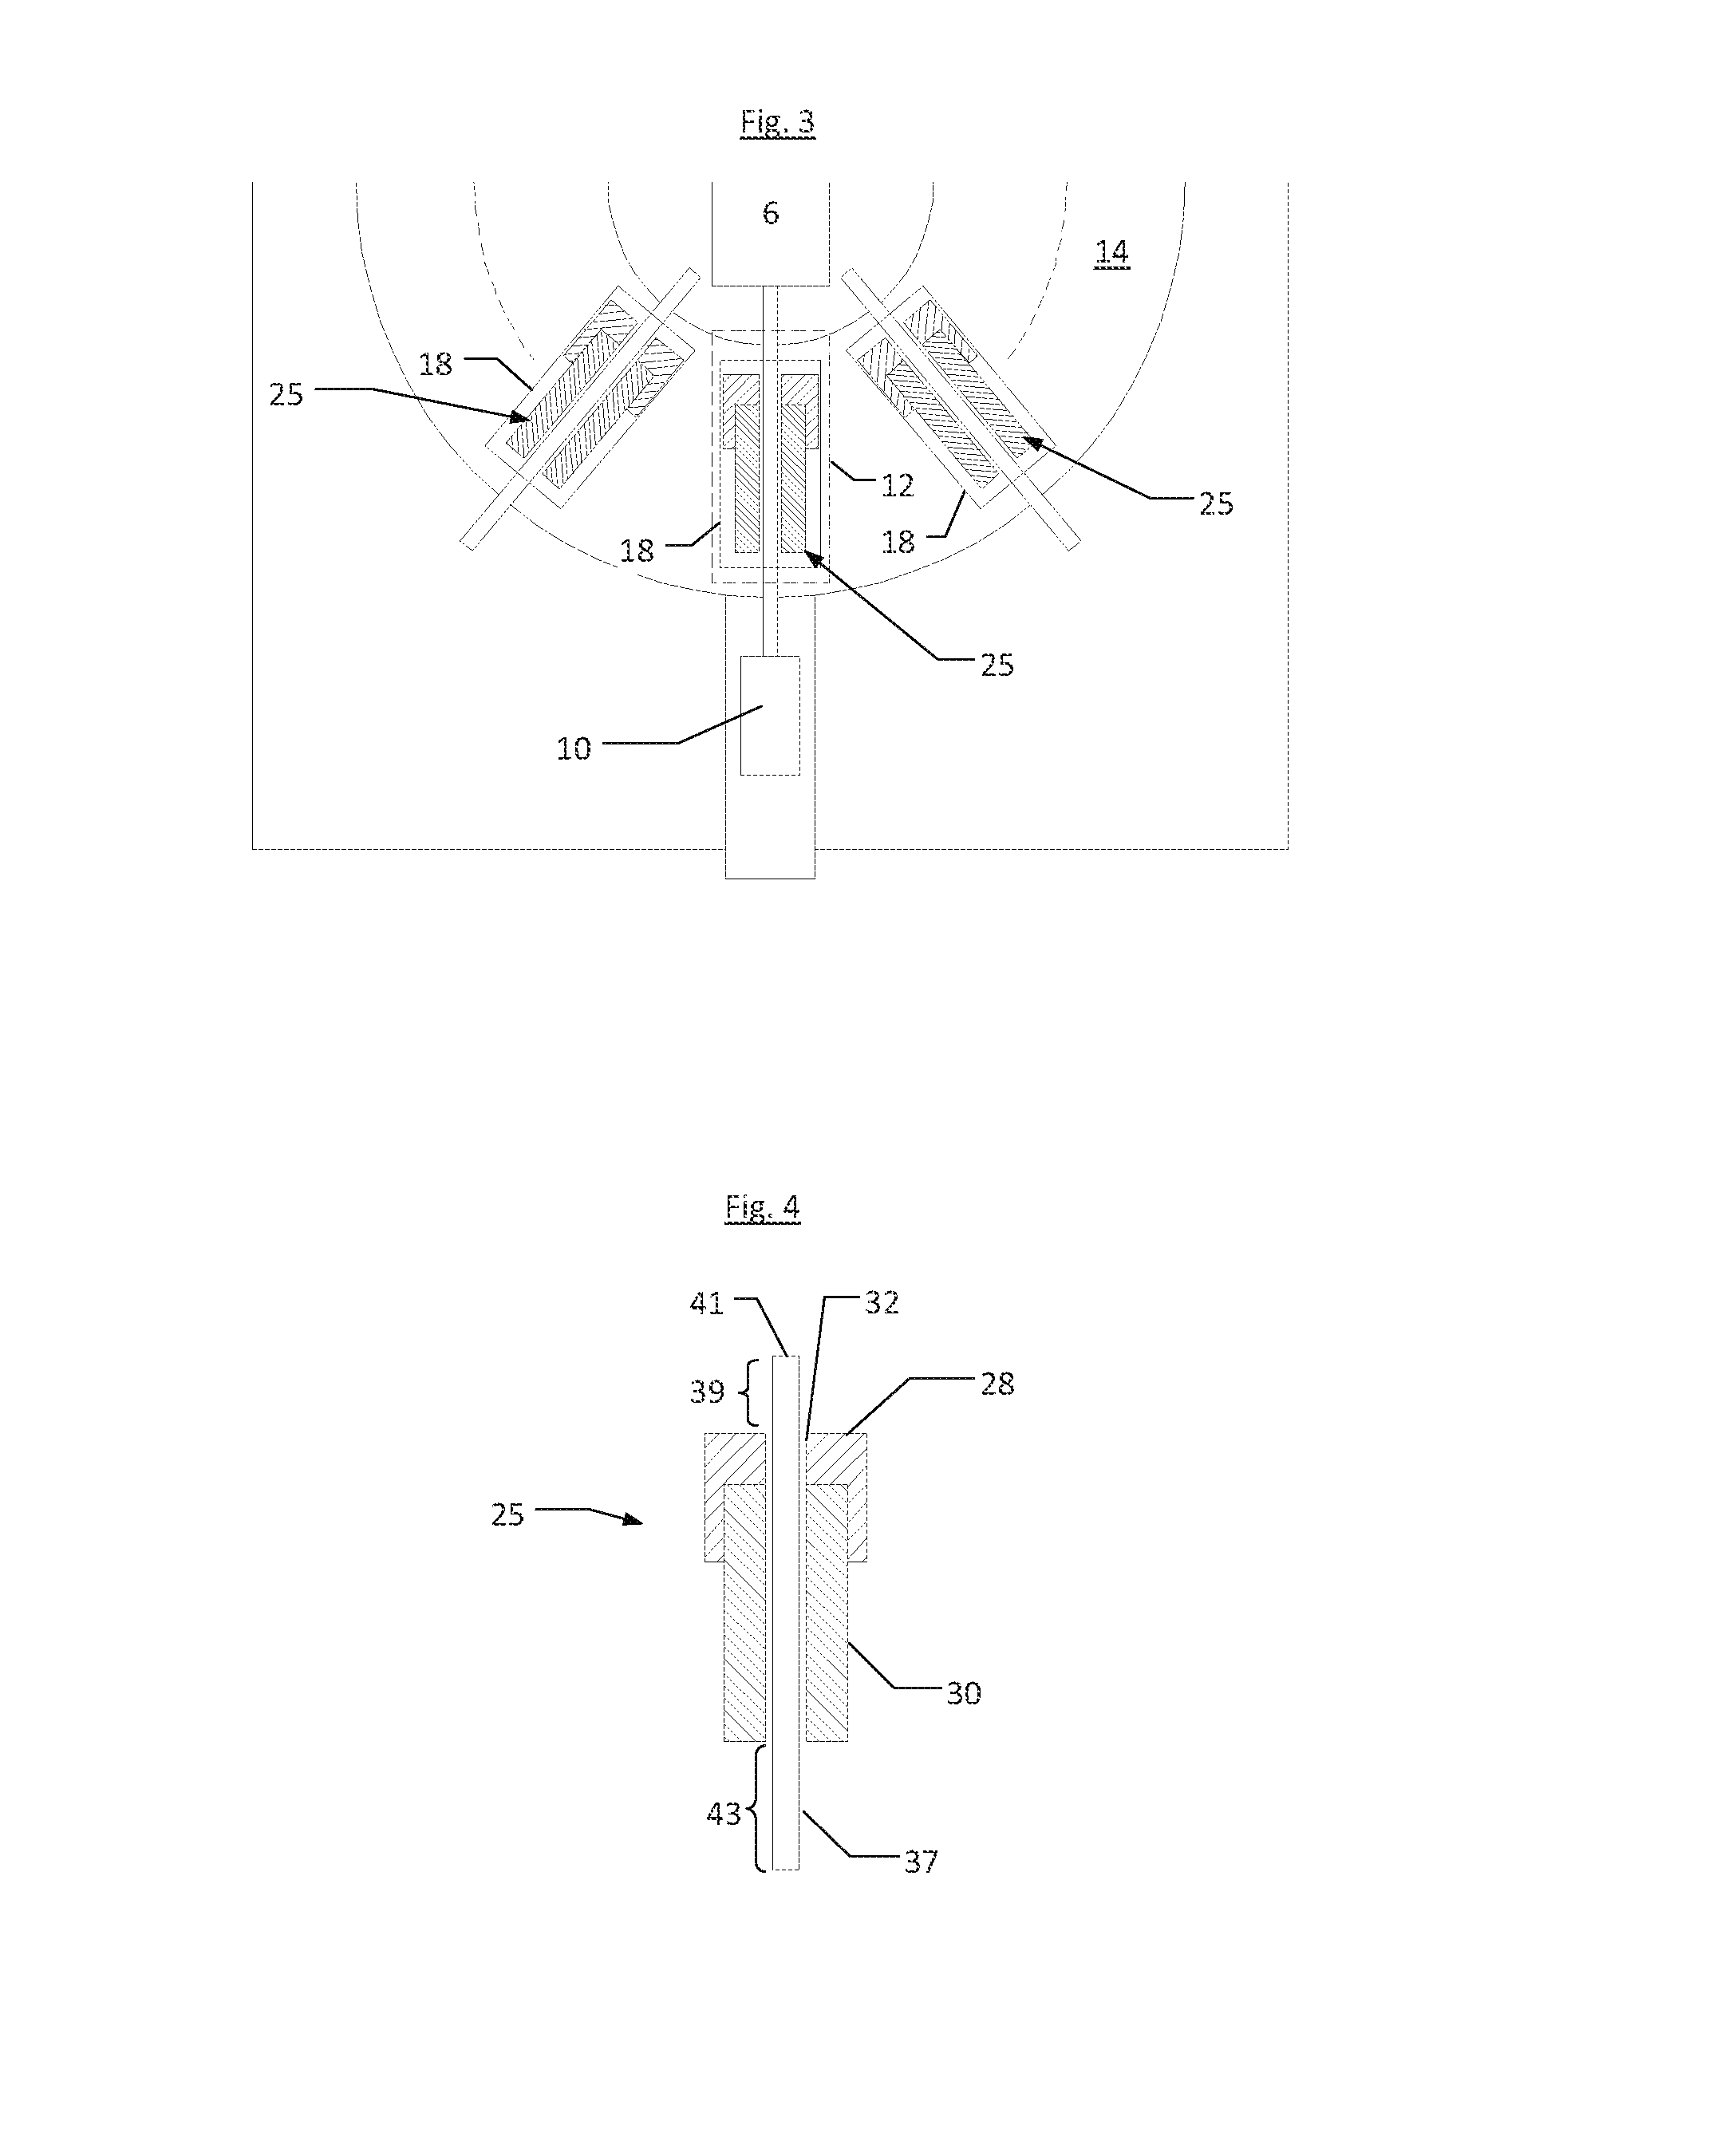 Apparatus and Method for Mass Producing Optical Fiber Splice-On Connector Subunits